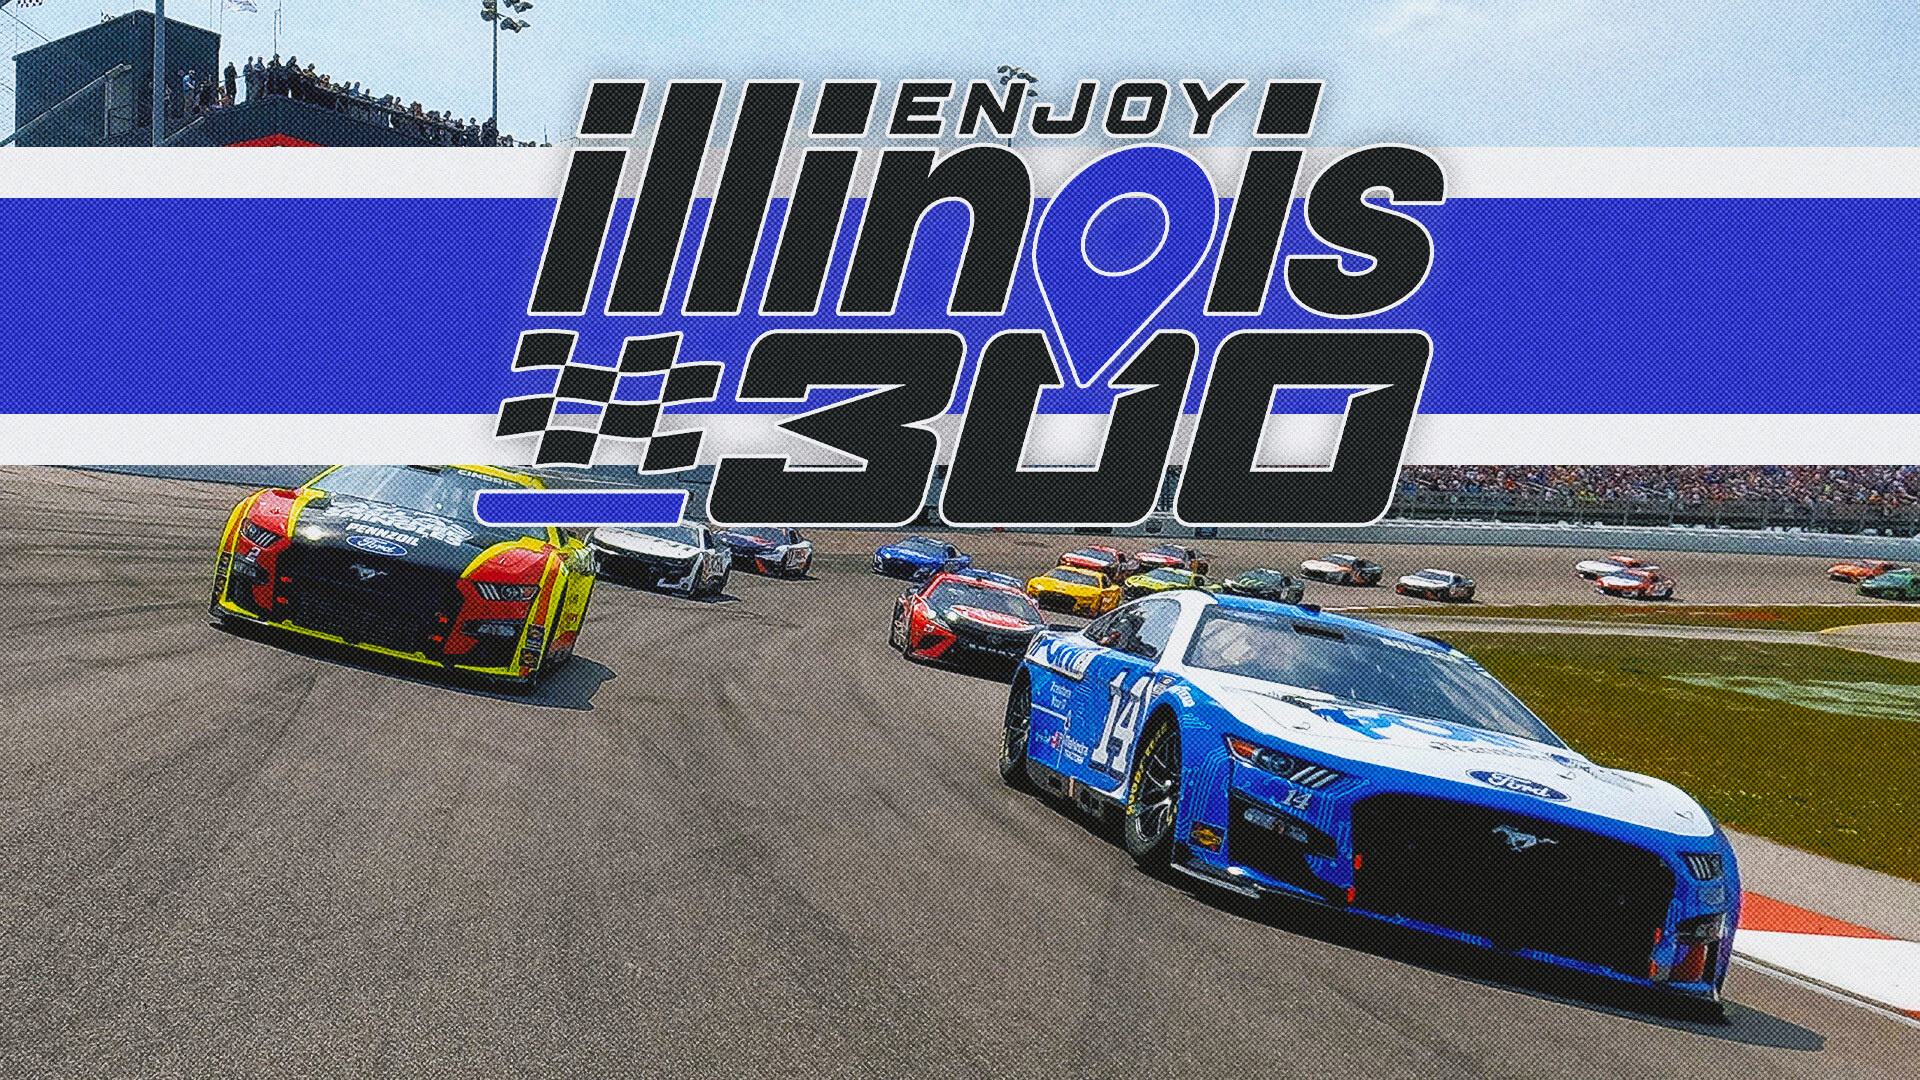 Enjoy Illinois 300 live updates: Top moments from World Wide Technology Raceway